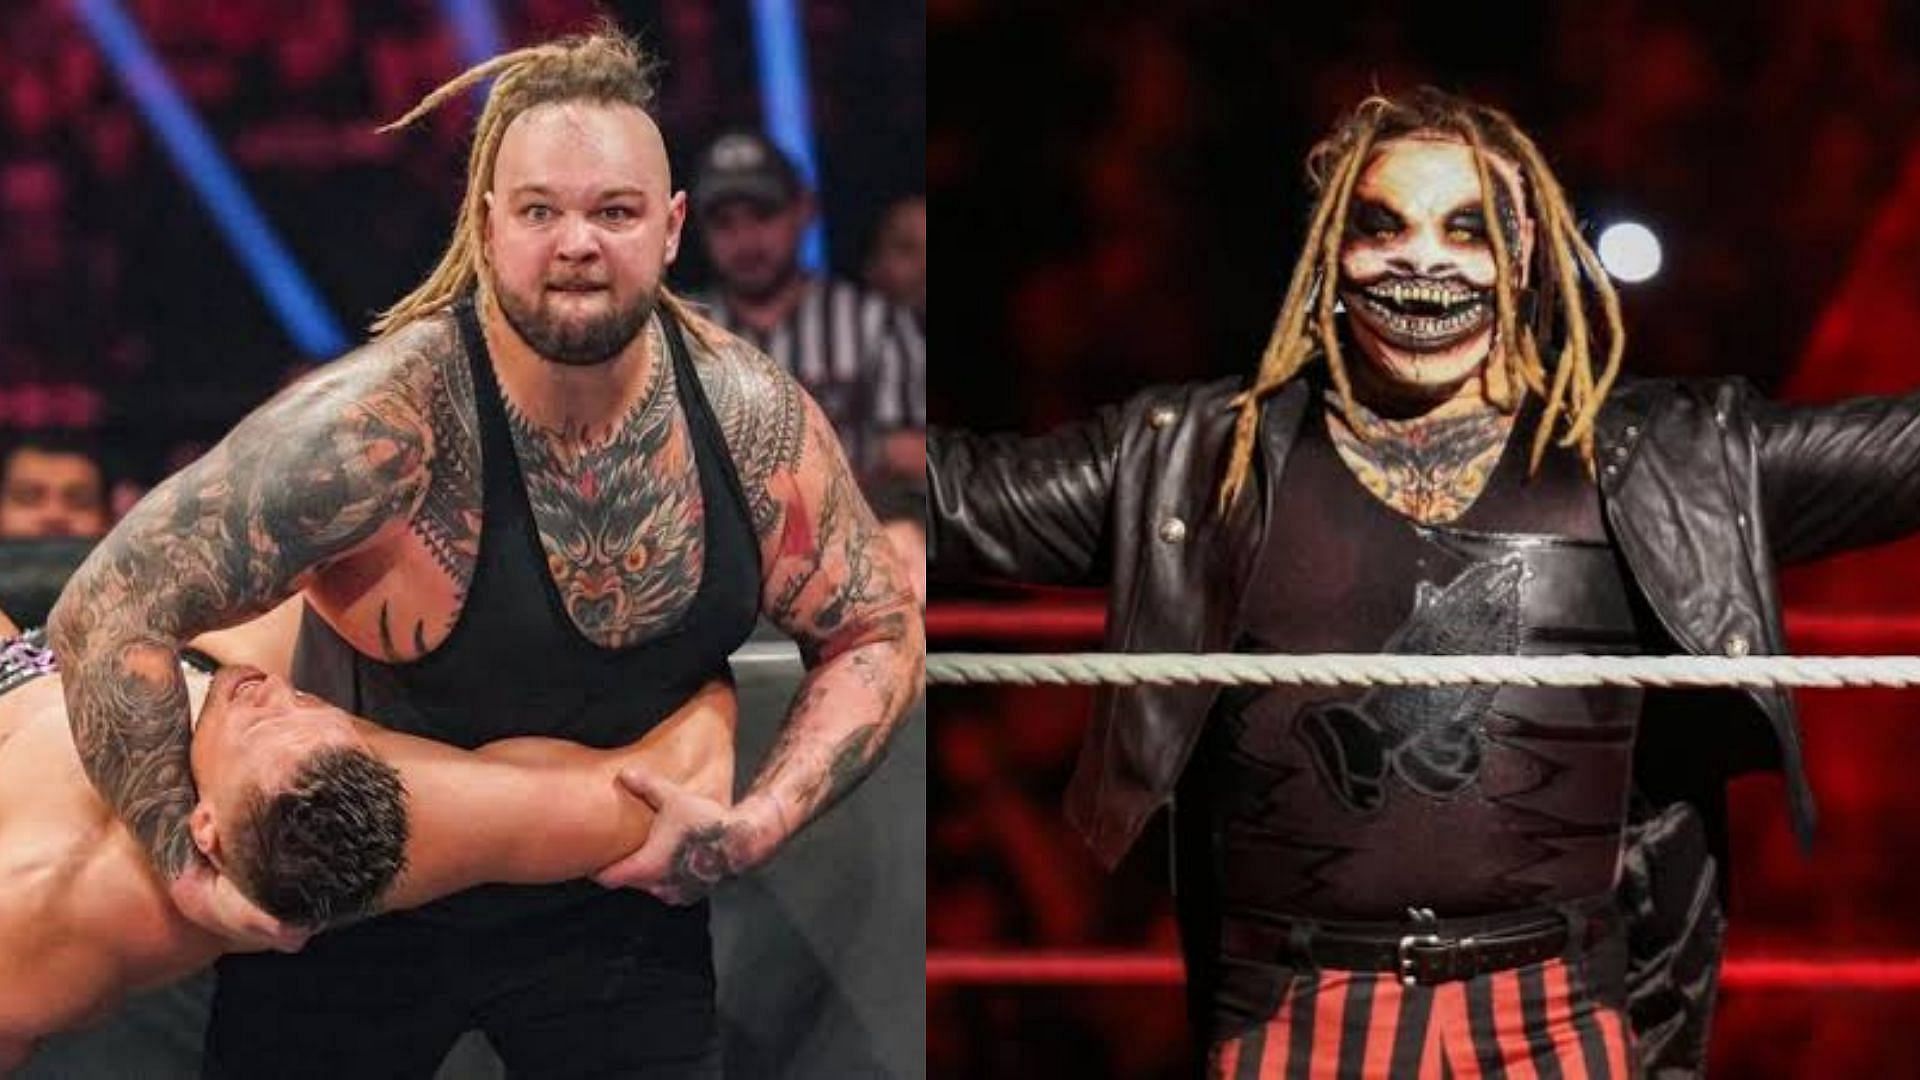 Bray Wyatt came to the rescue of someone who actually assaulted him in the first place!